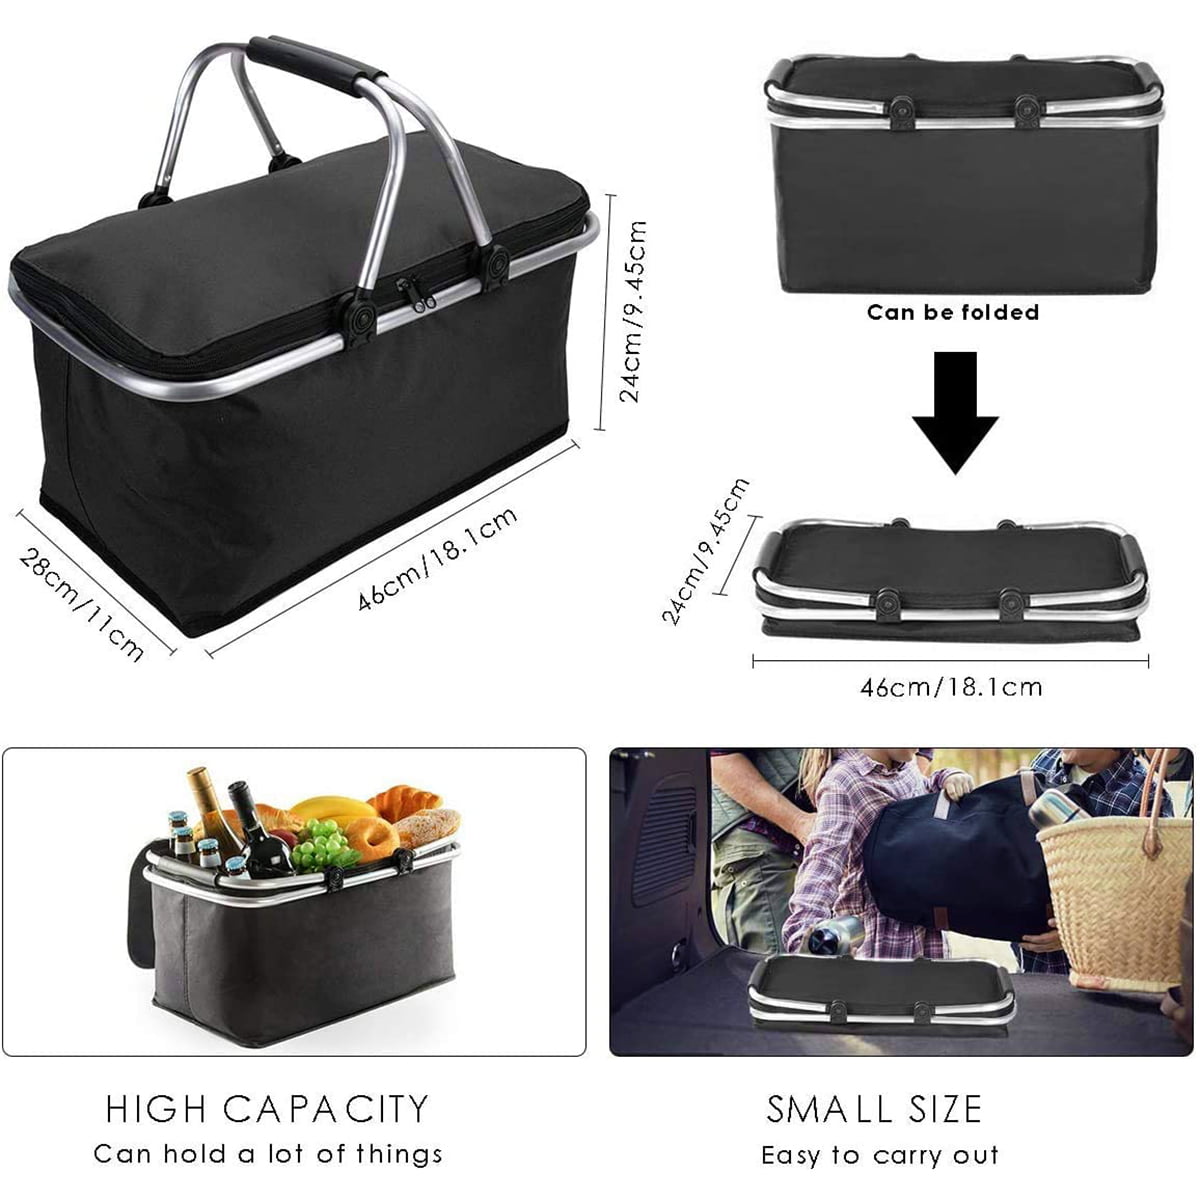 DKISEE Large Size Insulated Picnic Basket 30L Folding Cooler Bag Zip Closure Basket with Carrying Handles Black 